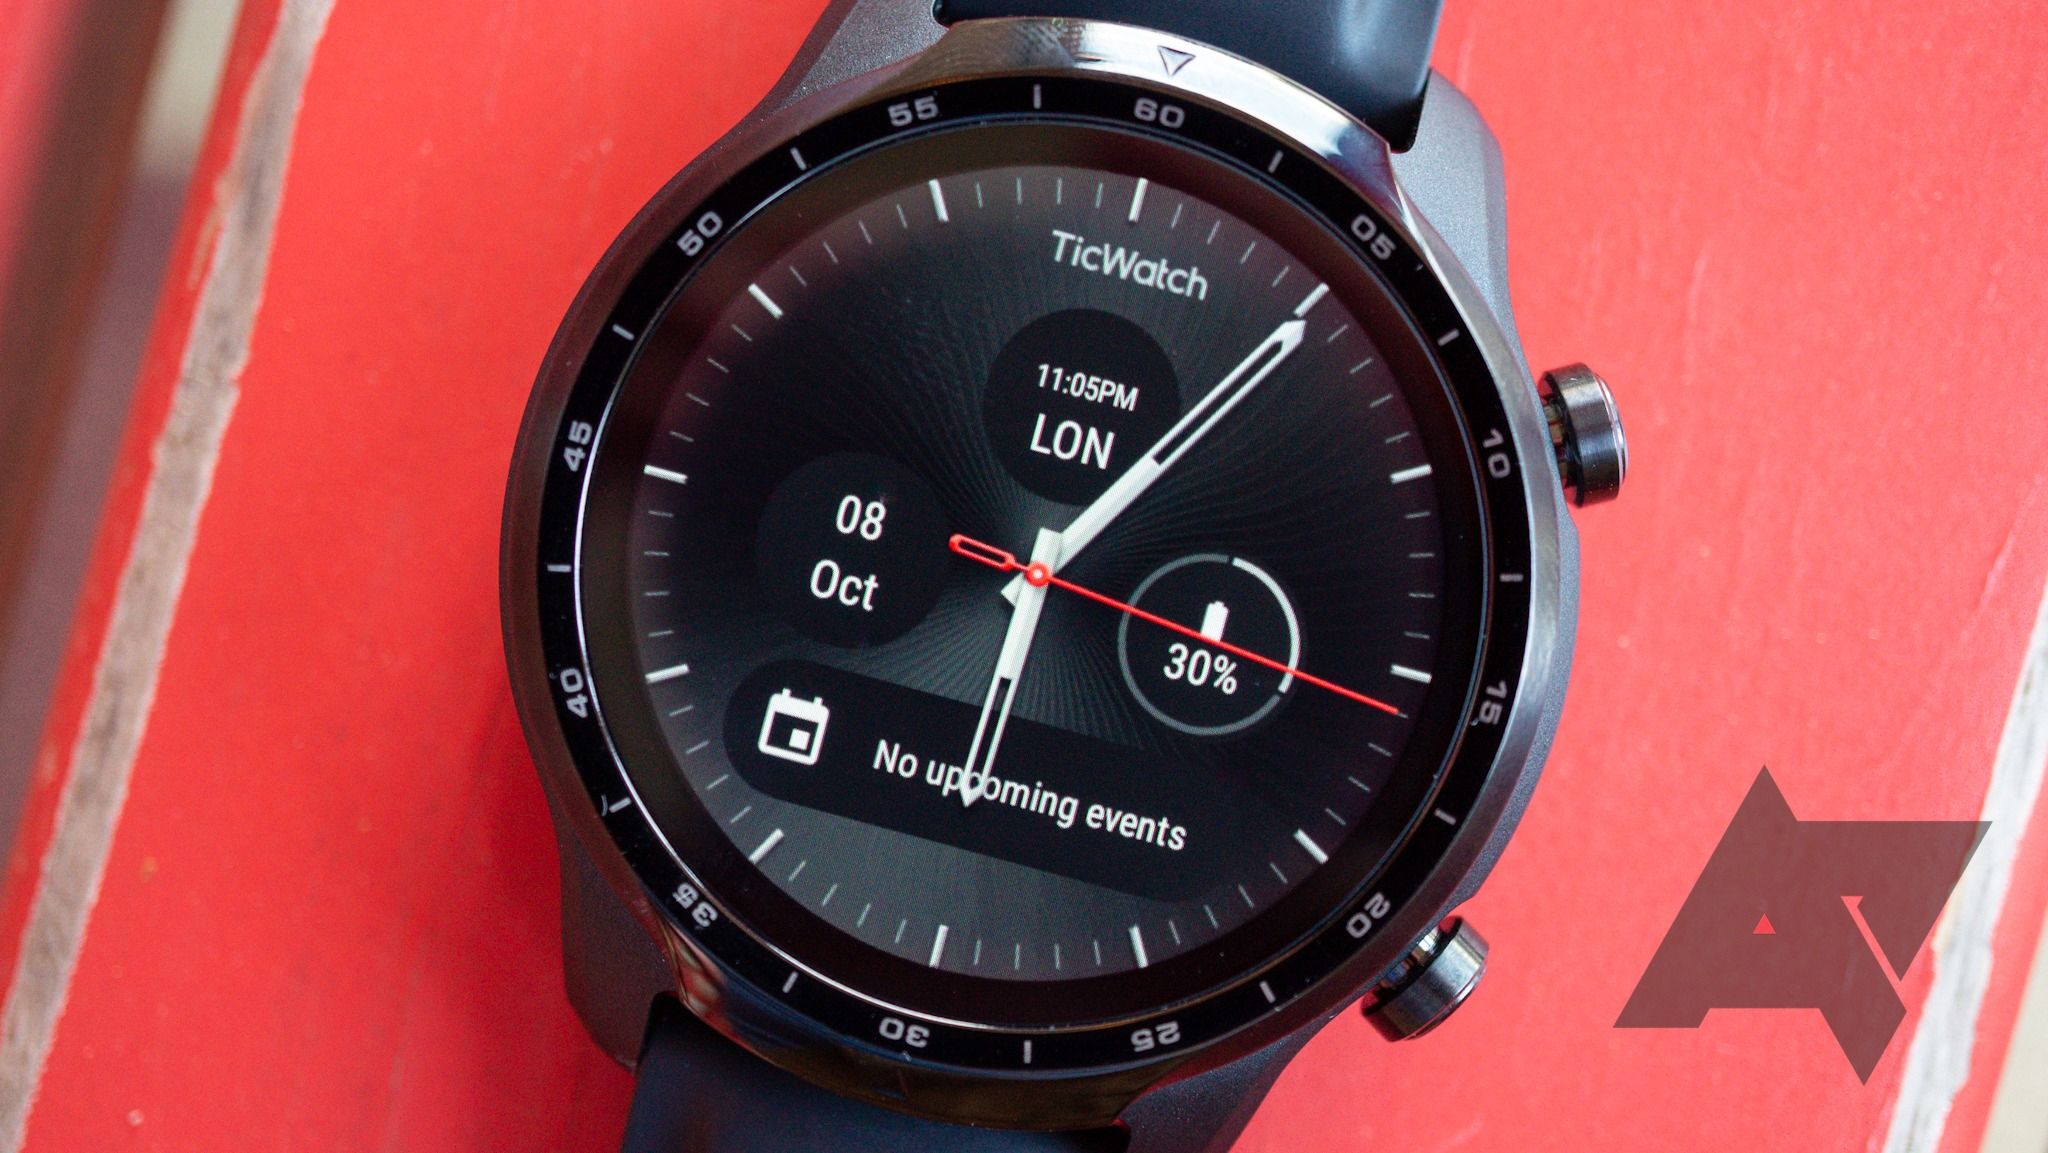 Mobvoi’s TicWatch smartwatches are finally getting Wear OS 3